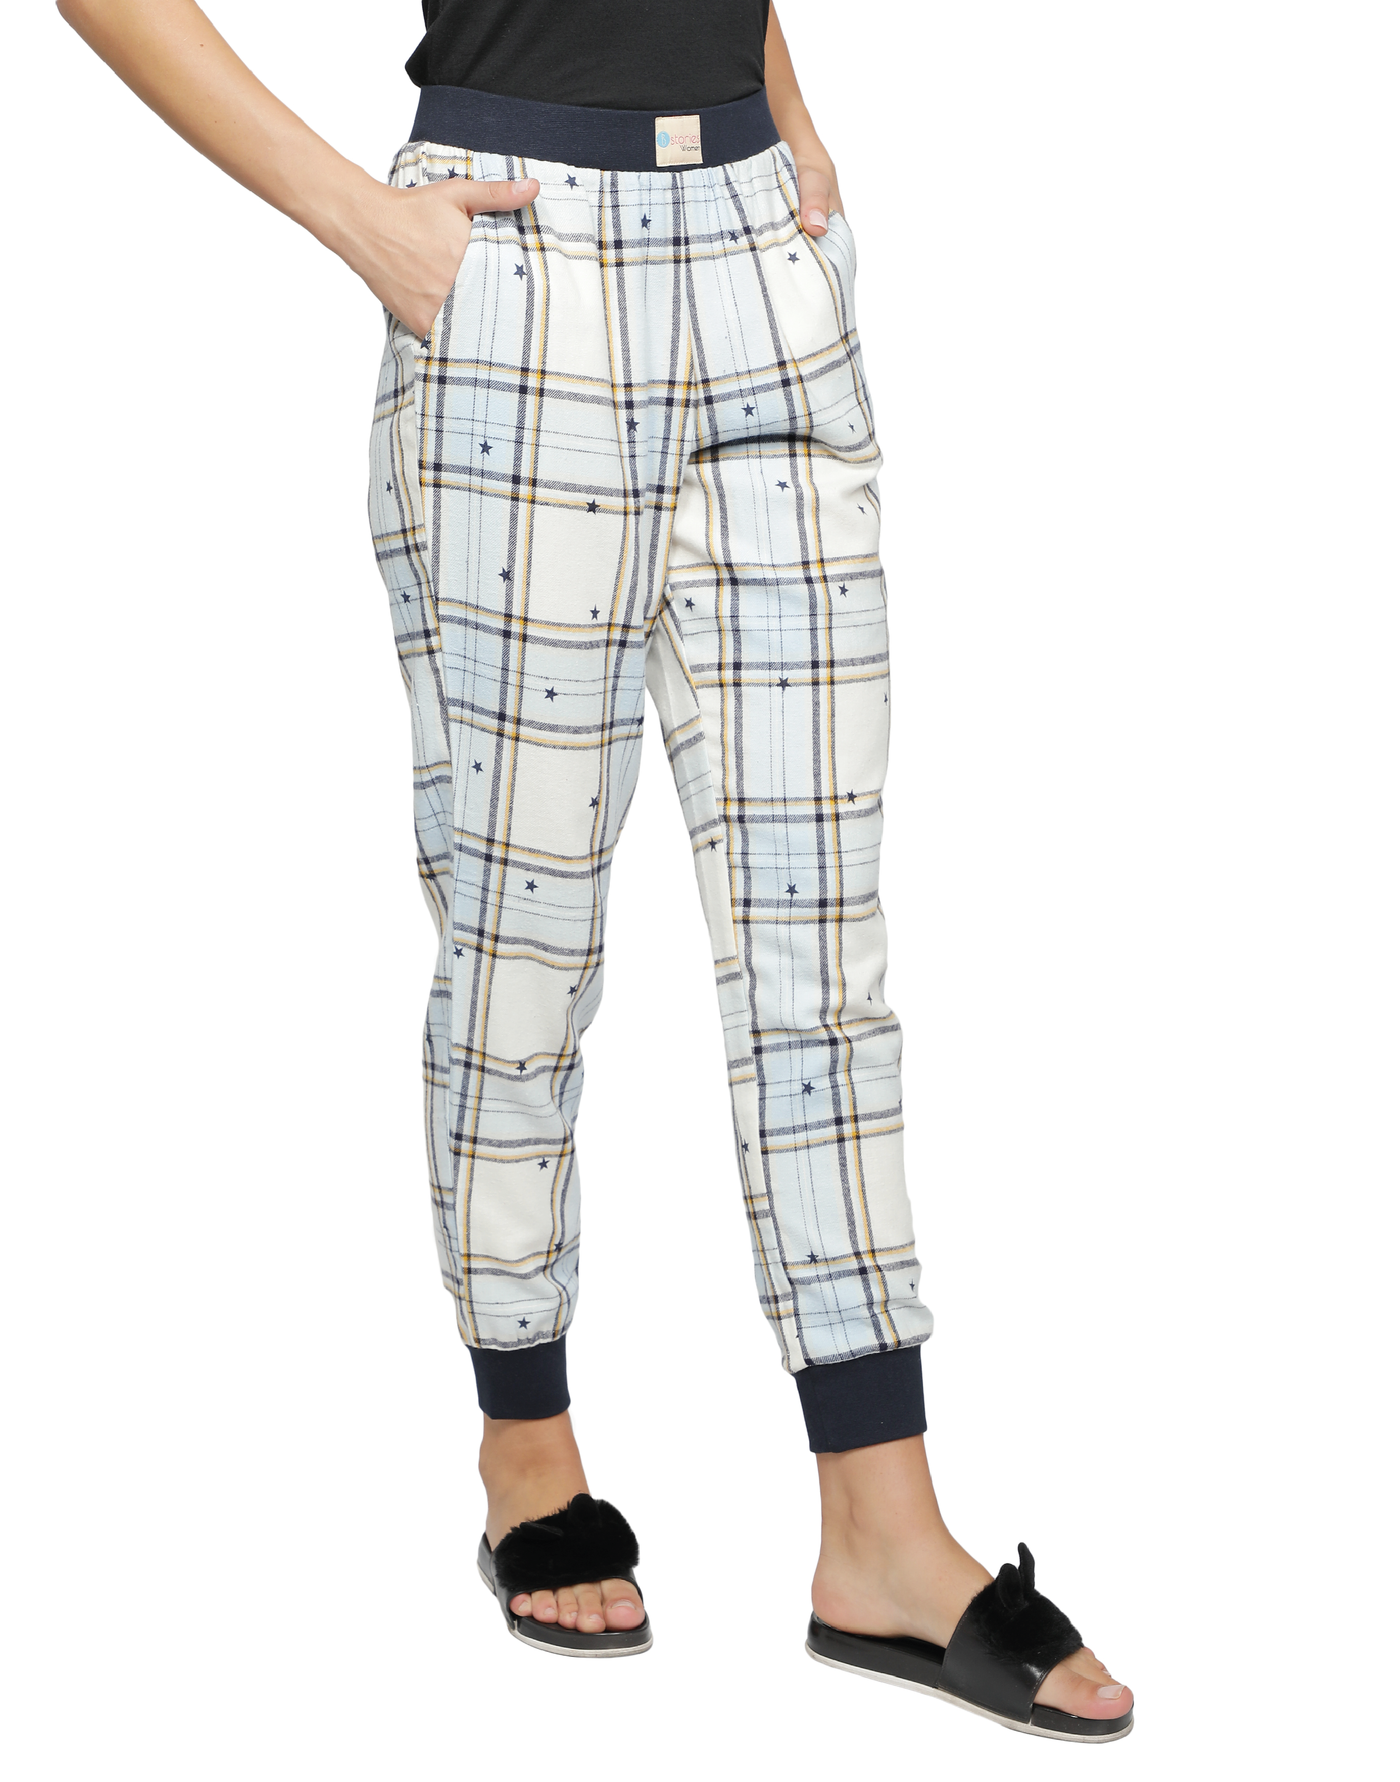 Lounge Pant for Women-Navy Star Checked Jogger